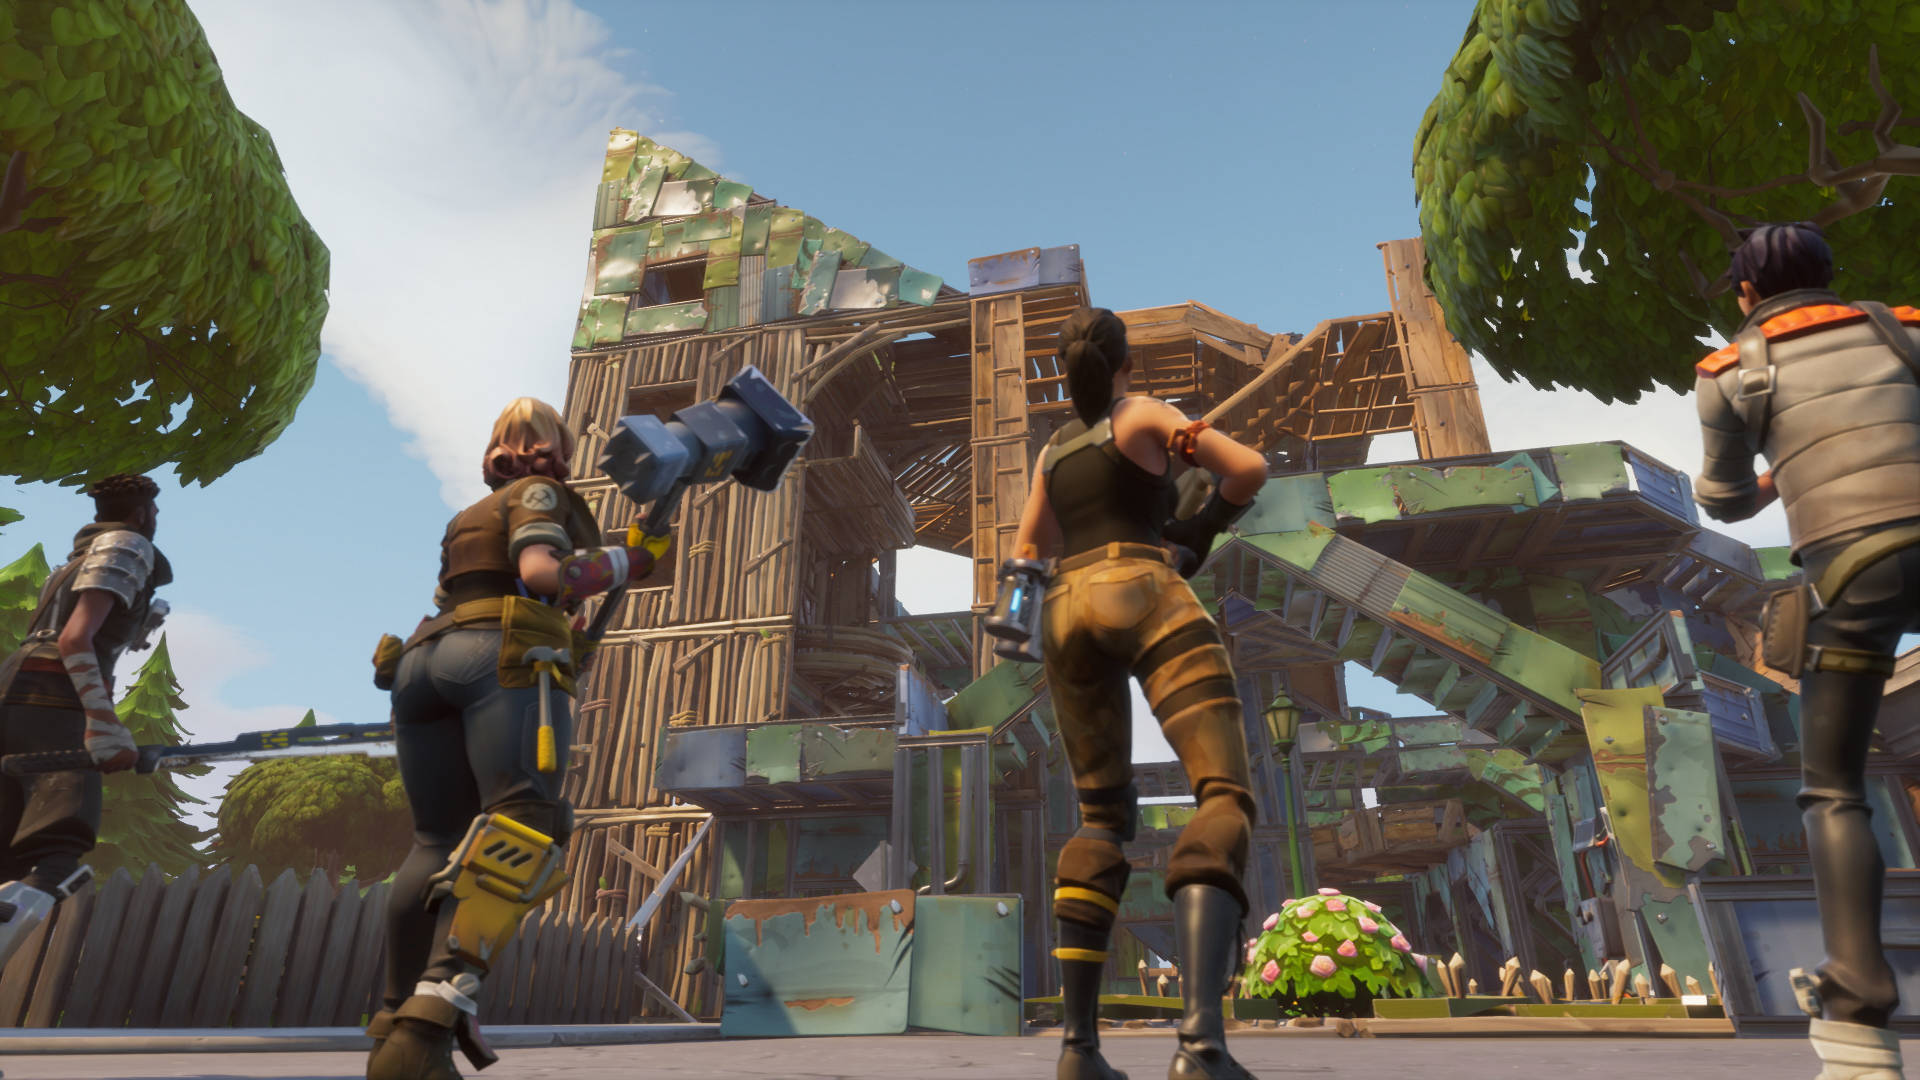 Fortnite Imspeedygonzales Makes Building And Editing Practice - imspeedygonzales has created a practice course for building and editing in fortnite